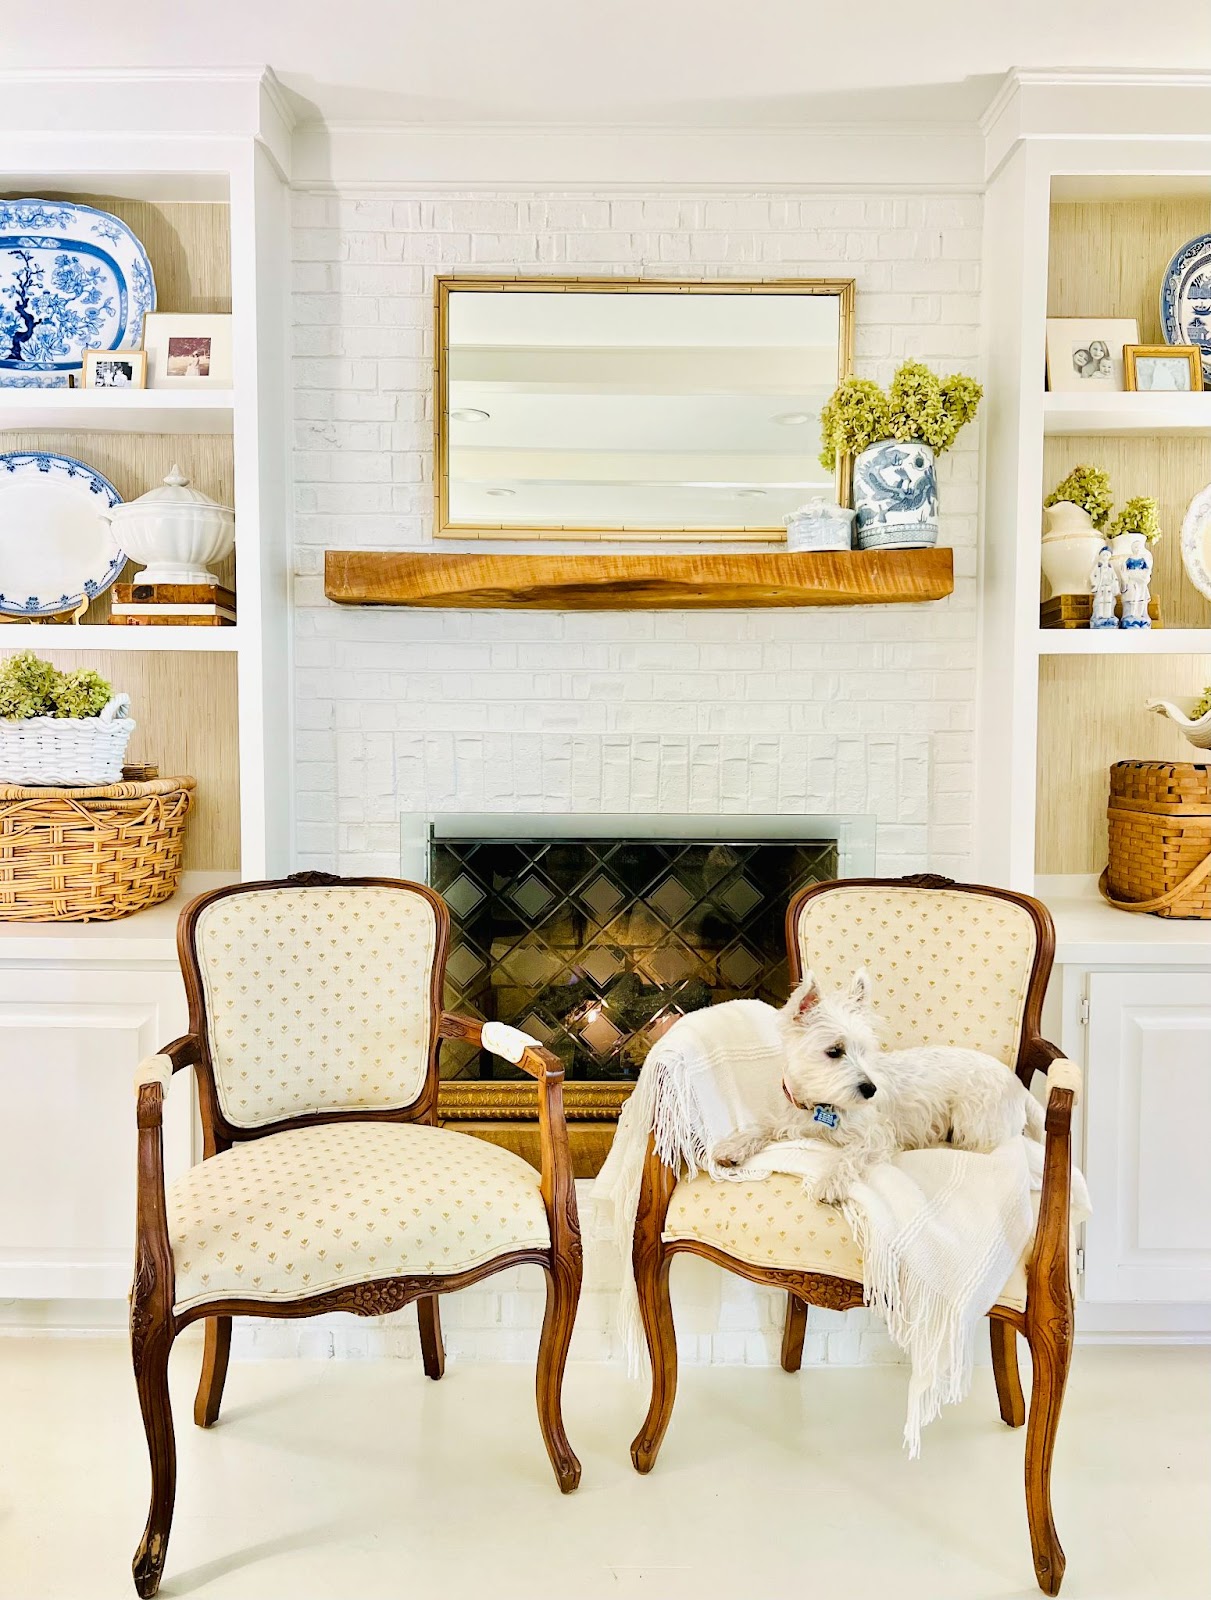 Sally's fireplace adorned with a rectangular gilt mirror, surrounded by an assortment of blue and white porcelains and rattan baskets. Two armchairs are placed in front of the fireplace, with Sally's puppy sitting on one of them.